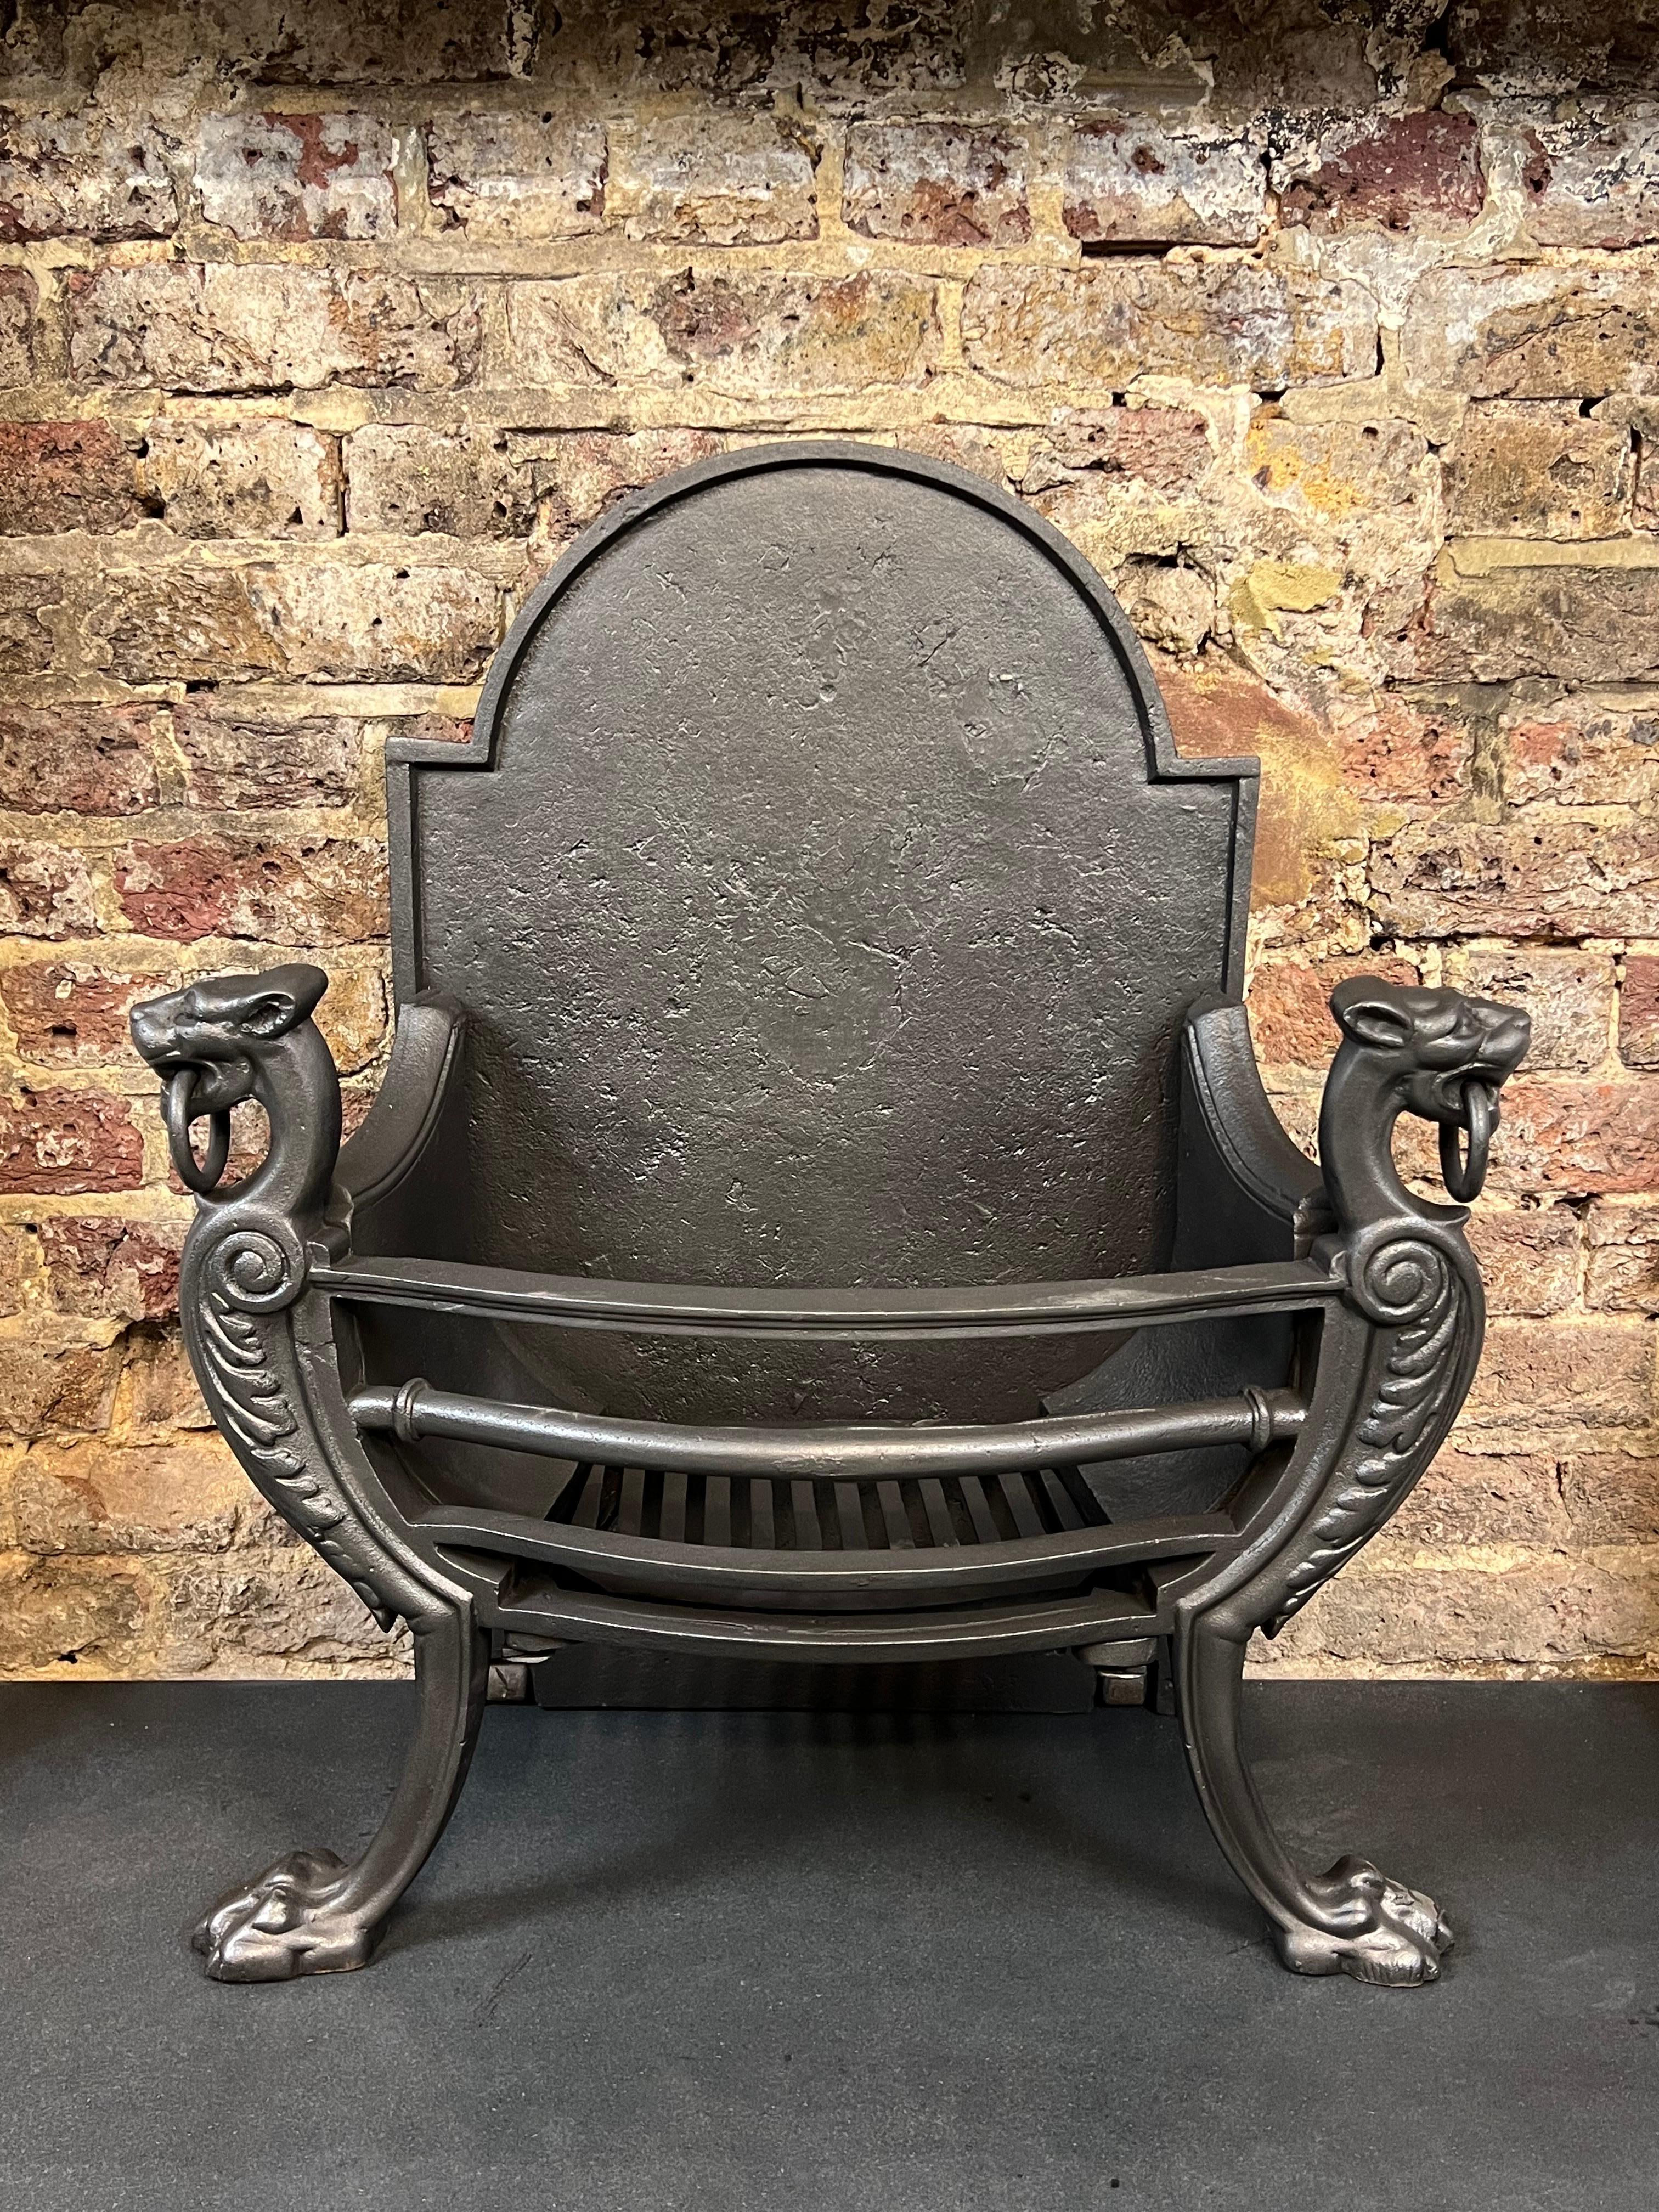 19th century fireplace dog grate. 
This antique English dog basket is finely made representing the iconic Victorian Gothic period. Its andirons cast in the form of lions with ringed mouths with lion paws at the feet, which support three horizontal